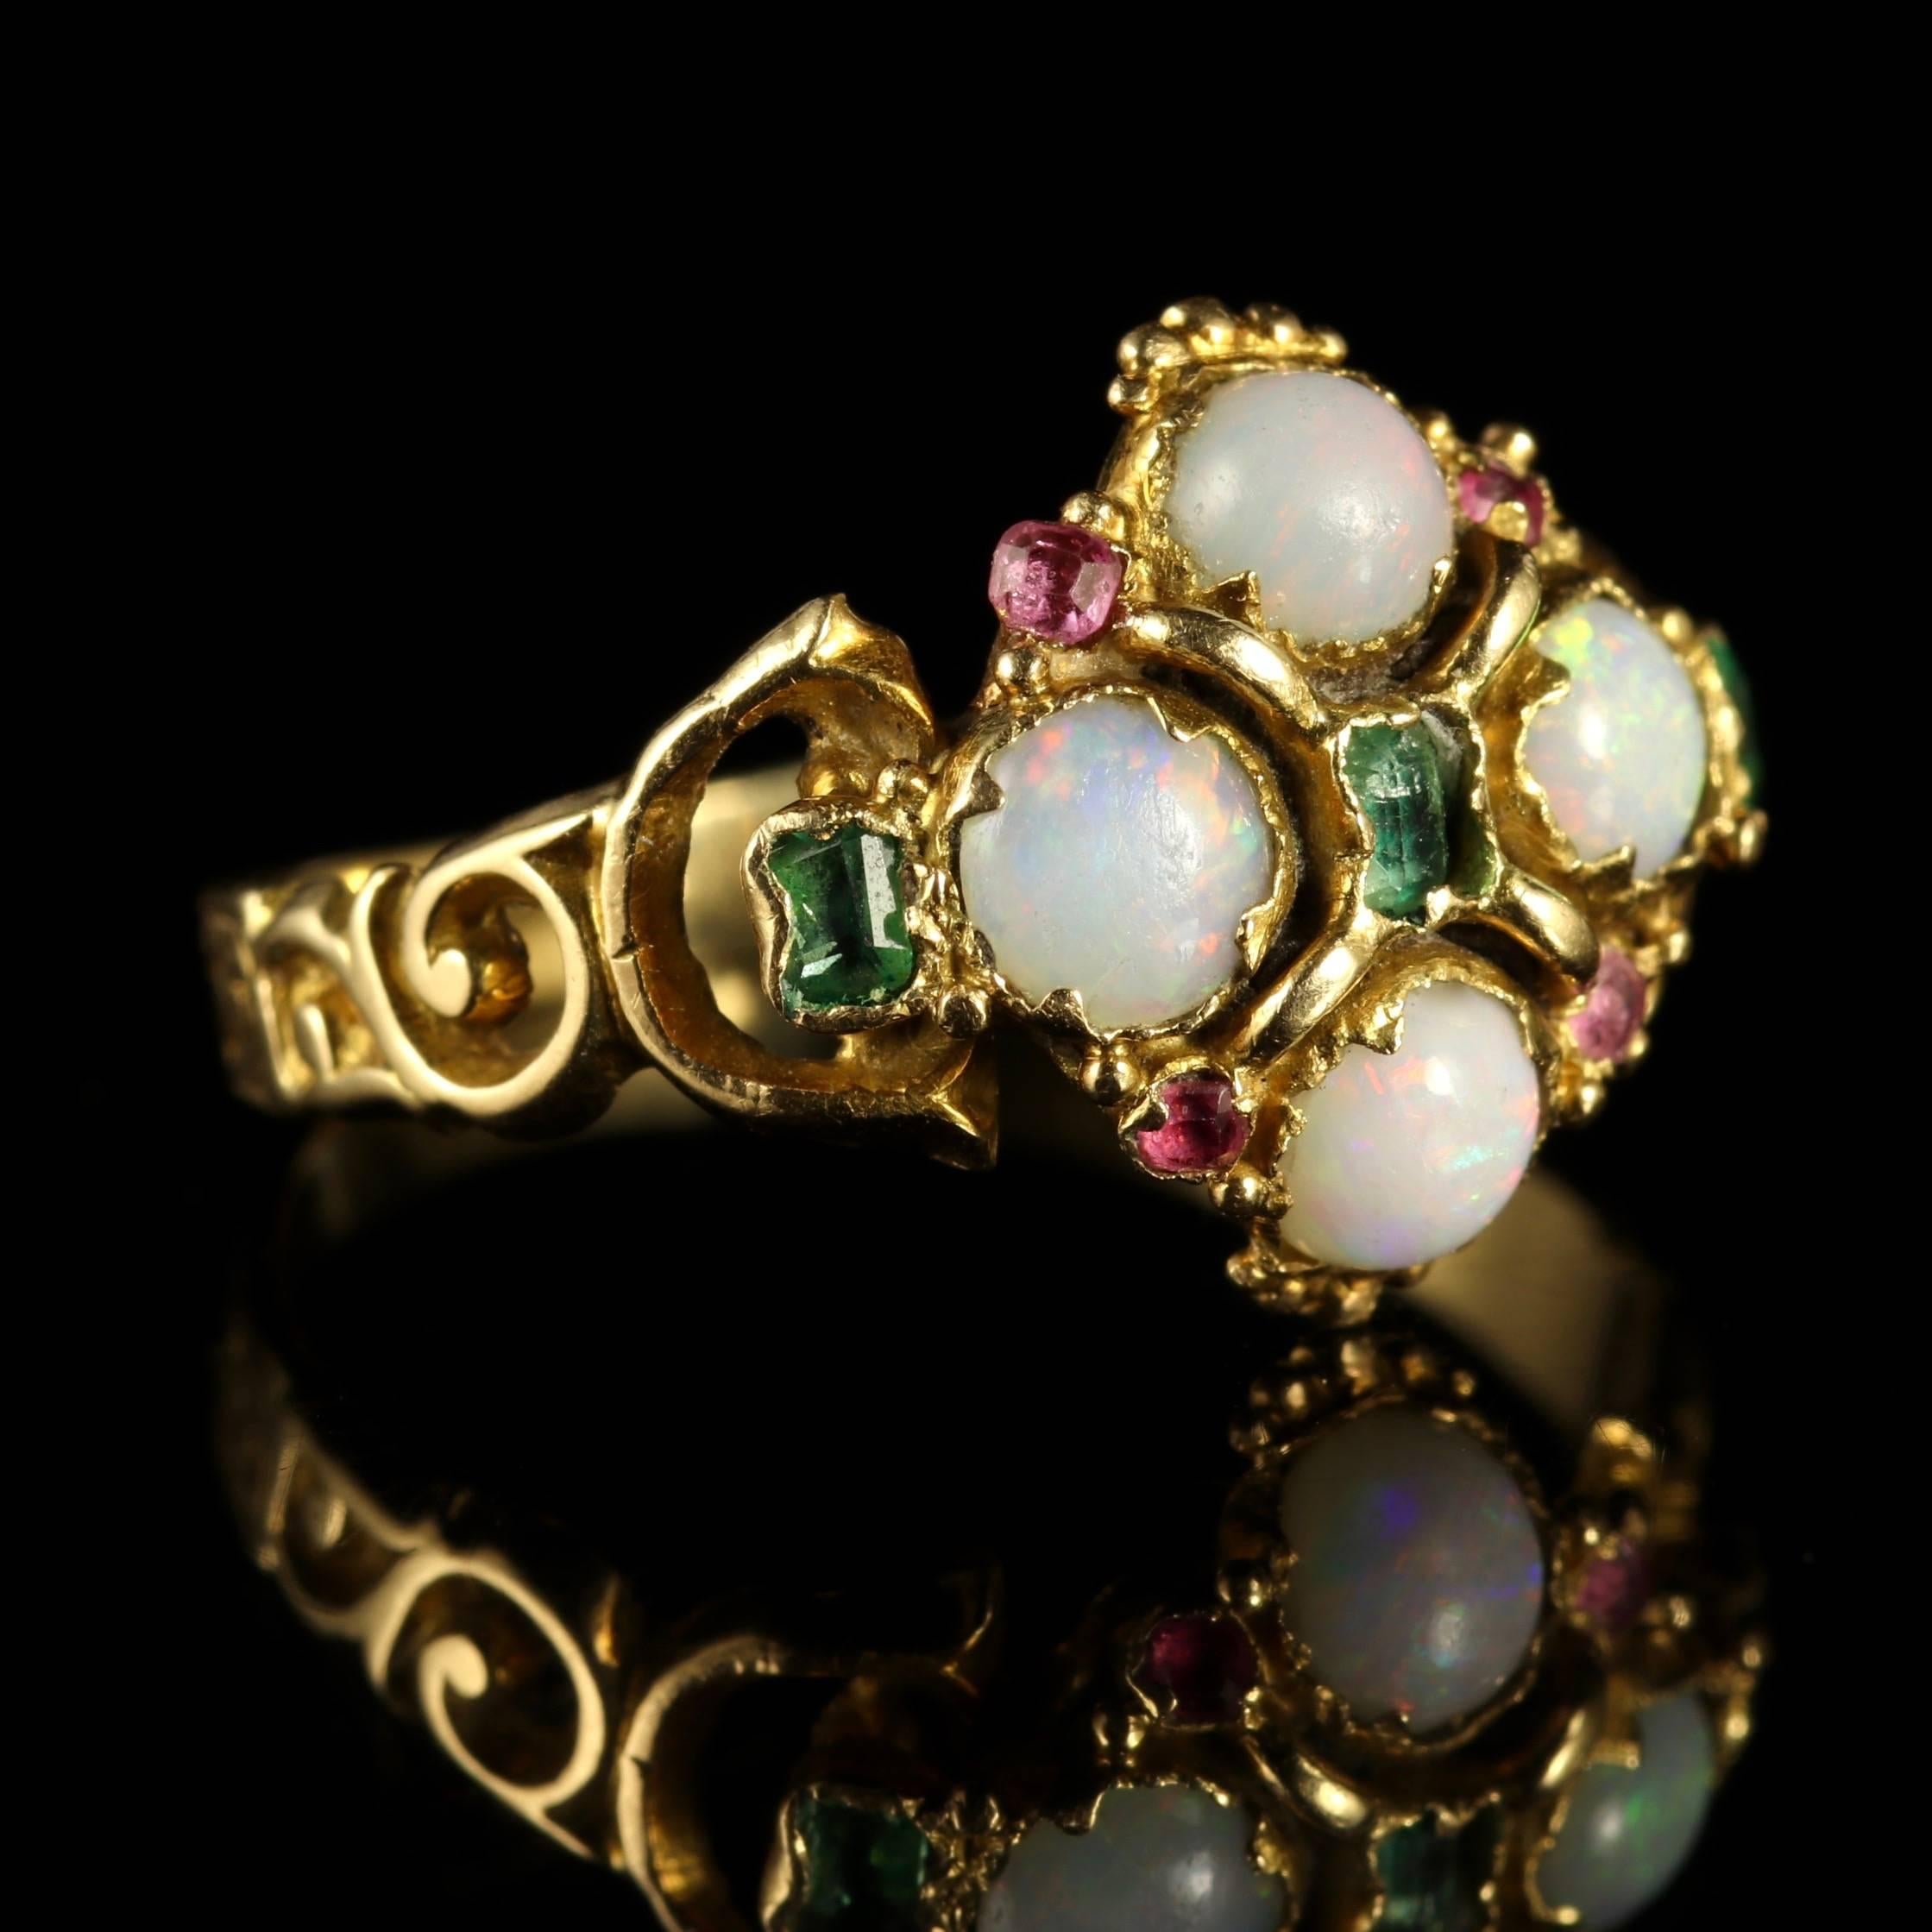 This genuine 18ct Yellow Gold Georgian ring is set with Opals, Emeralds and Rubies, Circa 1790.

All the colours of the Suffragette movement are set into the gallery however this is a Georgian piece.

Due to its age, Georgian jewellery is quite